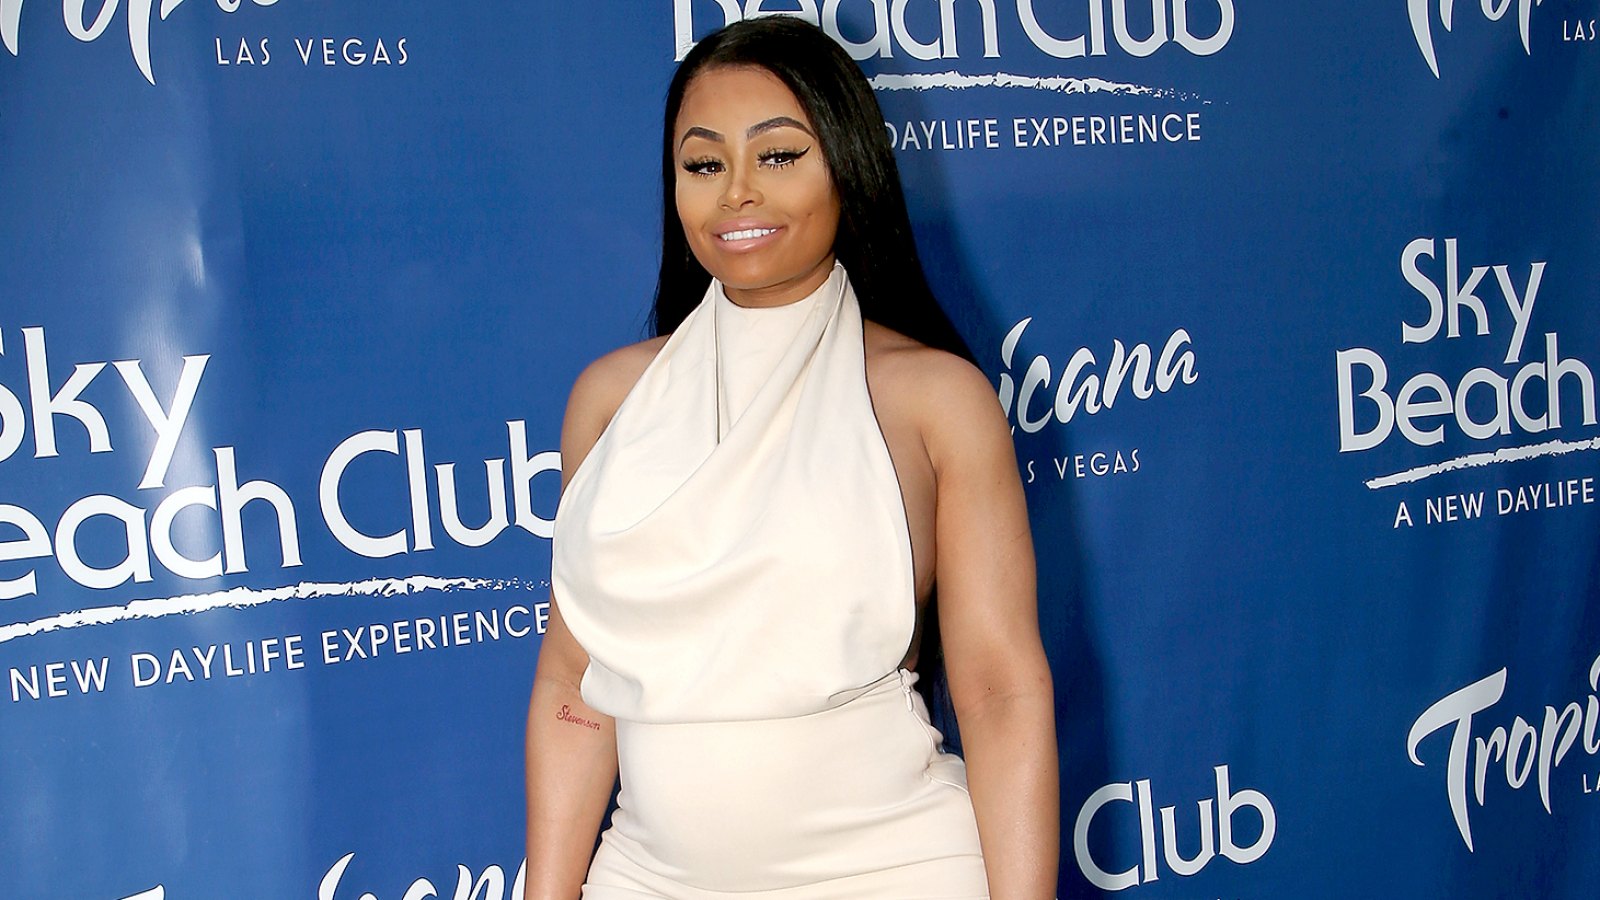 Blac Chyna attends the Sky Beach Club at the Tropicana Las Vegas on May 28, 2016 in Las Vegas, Nevada.